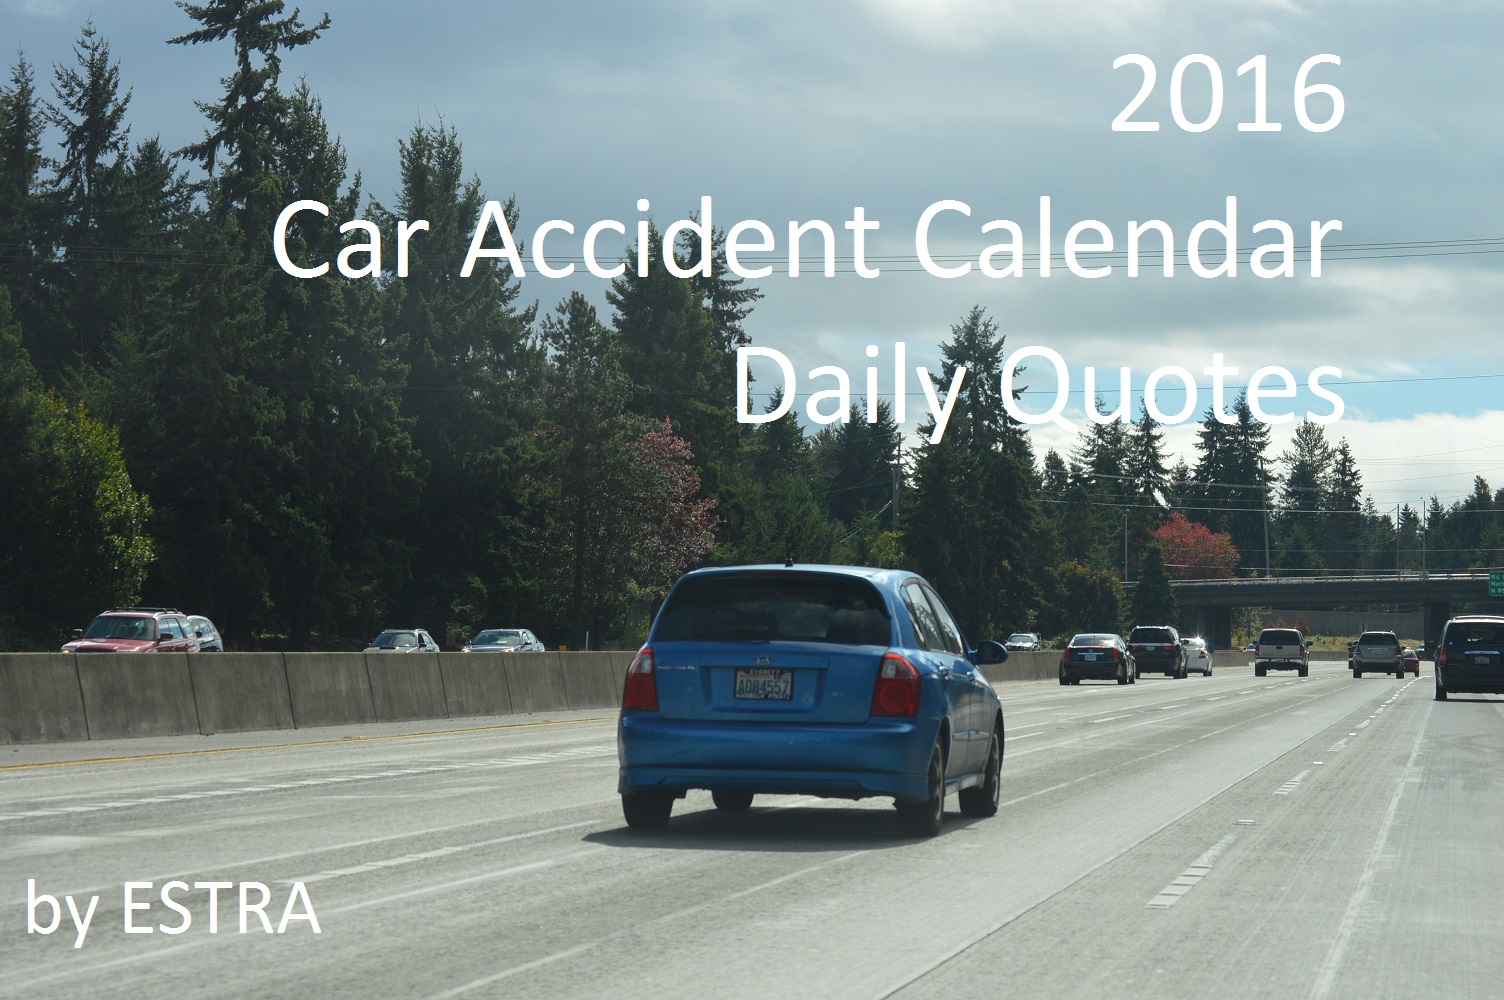 2016 Car Accident Calendar Daily Quotes by ESTRA. Pre-order at ESTRA Car Accident Official Site. 